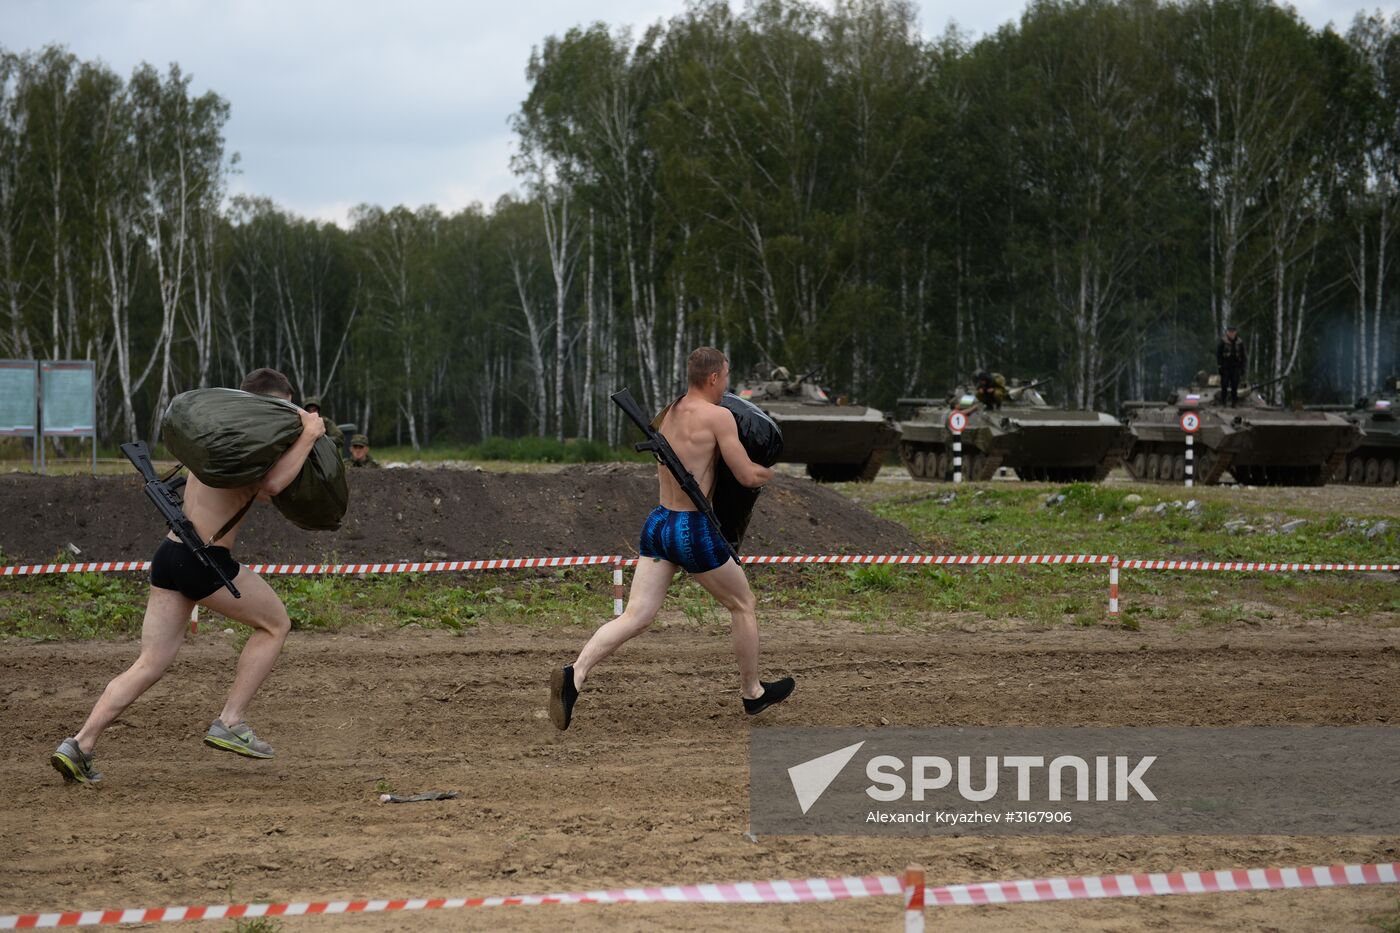 Novosibirsk Region hosts Army Scout Masters international competition